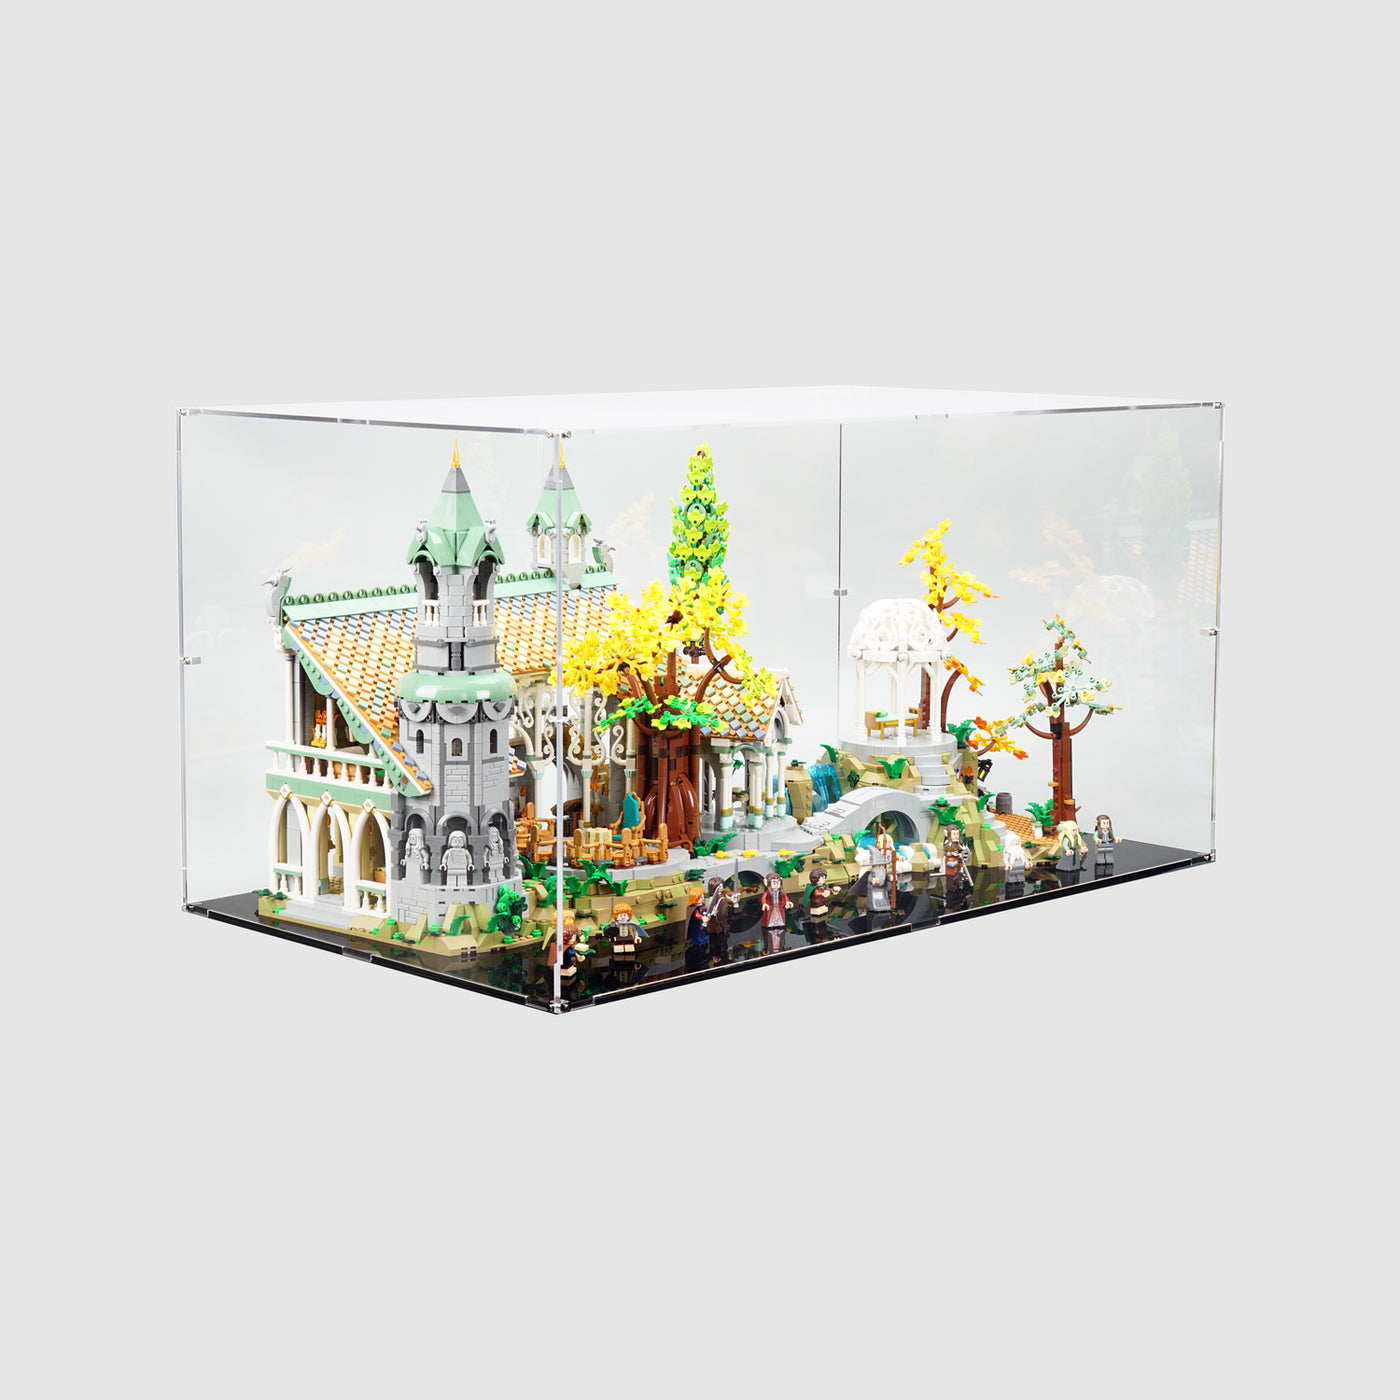 LEGO 10316 The Lord Of The Rings: Rivendell Display Case | ONBRICK